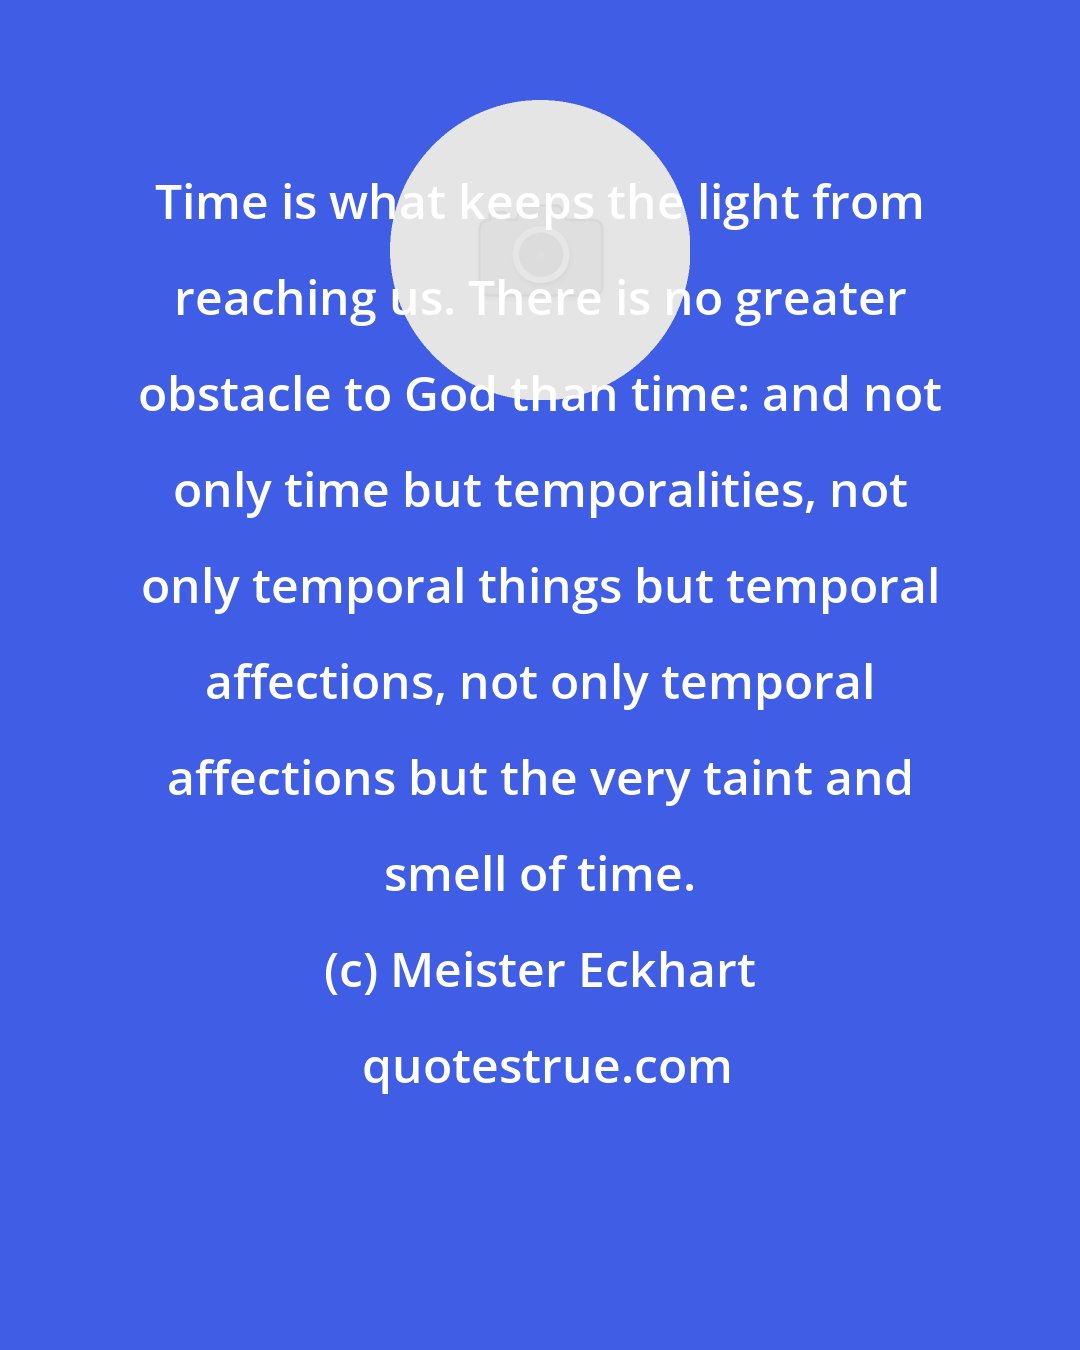 Meister Eckhart: Time is what keeps the light from reaching us. There is no greater obstacle to God than time: and not only time but temporalities, not only temporal things but temporal affections, not only temporal affections but the very taint and smell of time.